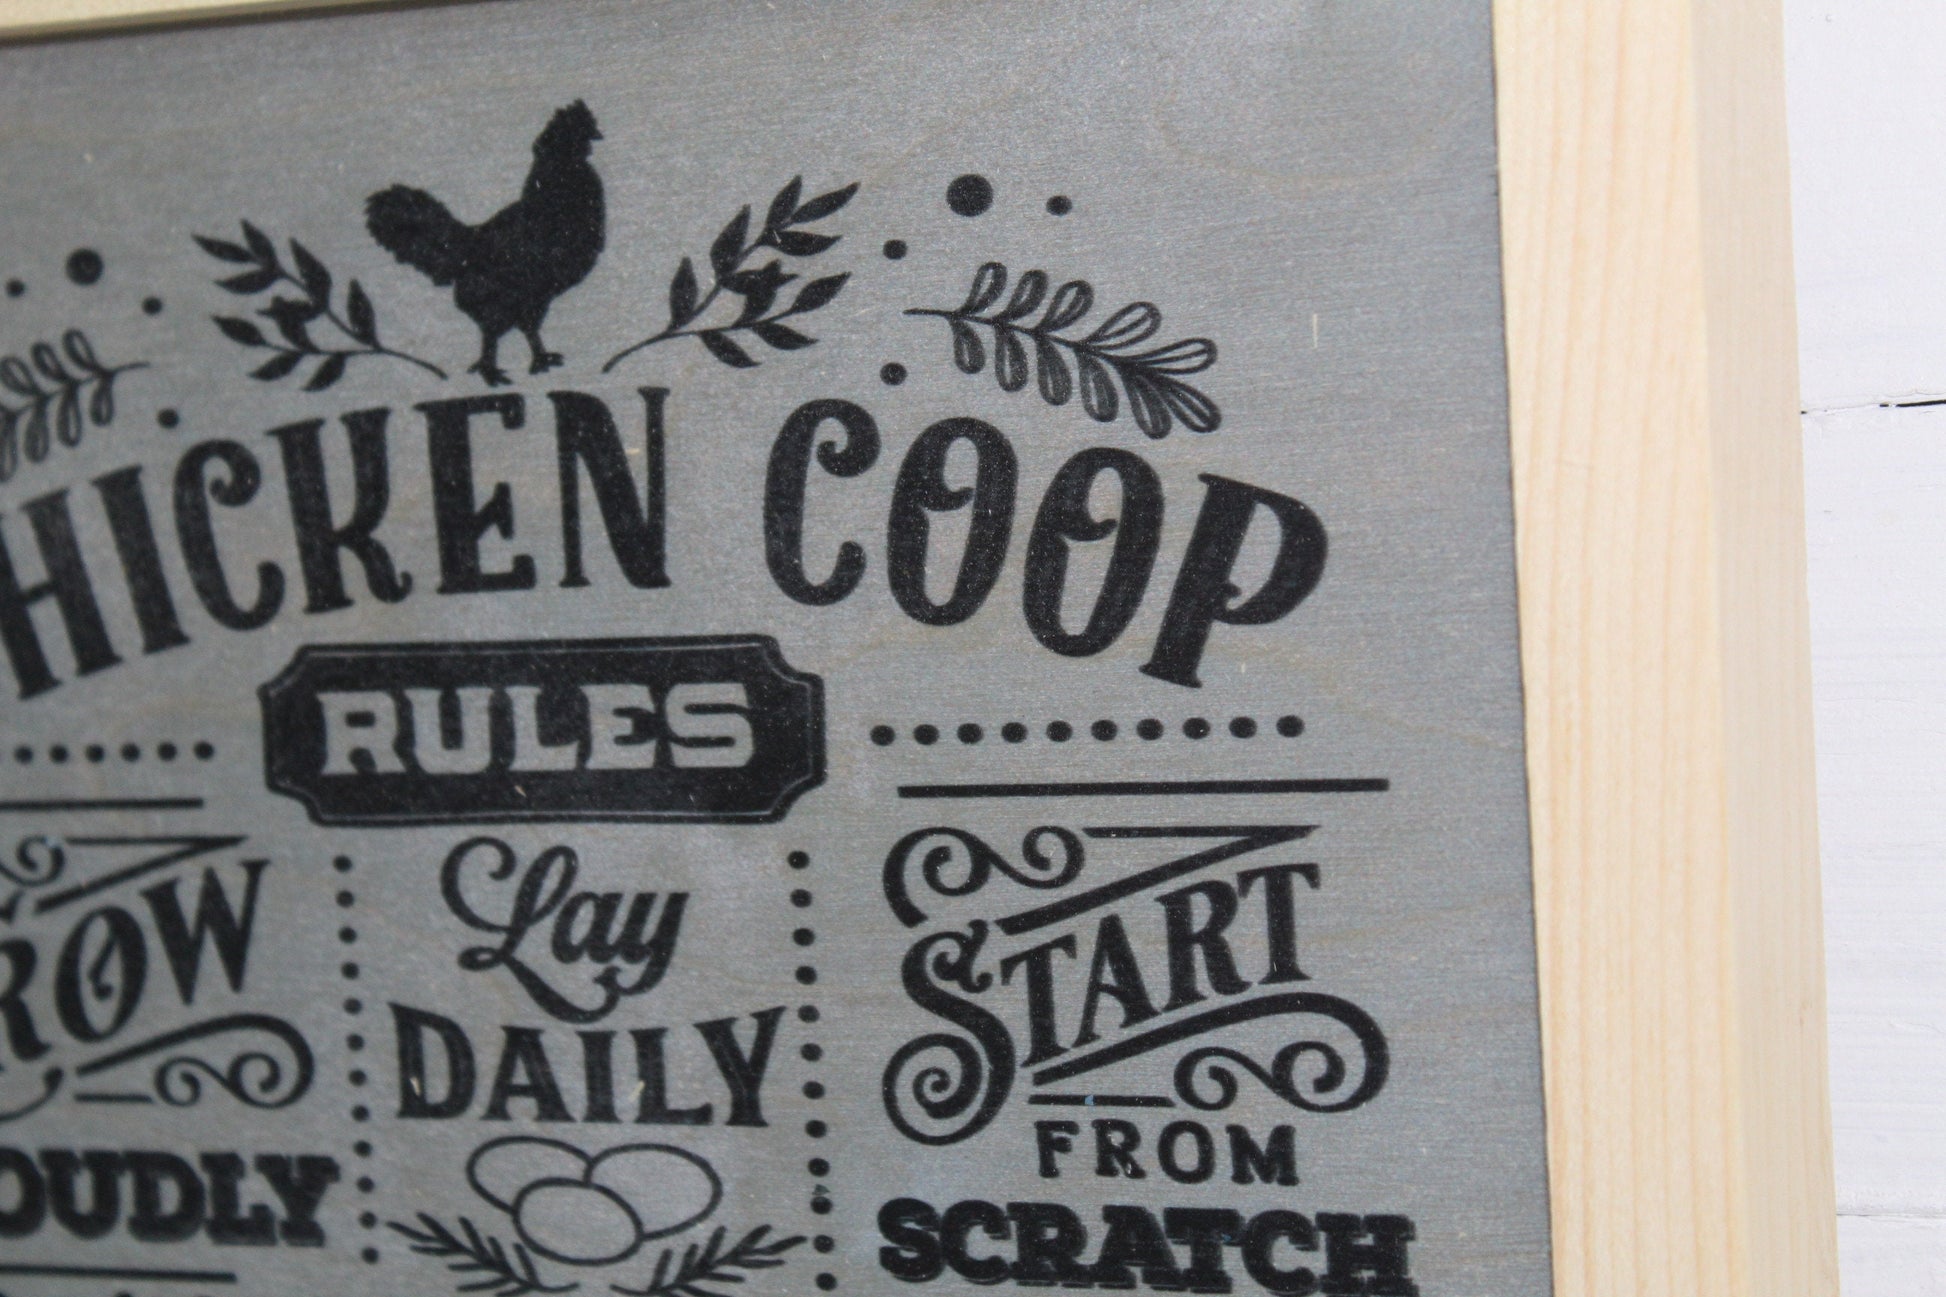 Chicken Coop Rules List Wood Sign Wall Hanging Simply Work Hard Decoration Standard Principles Rustic Code Eggs Crow Rooster Rise and Shine